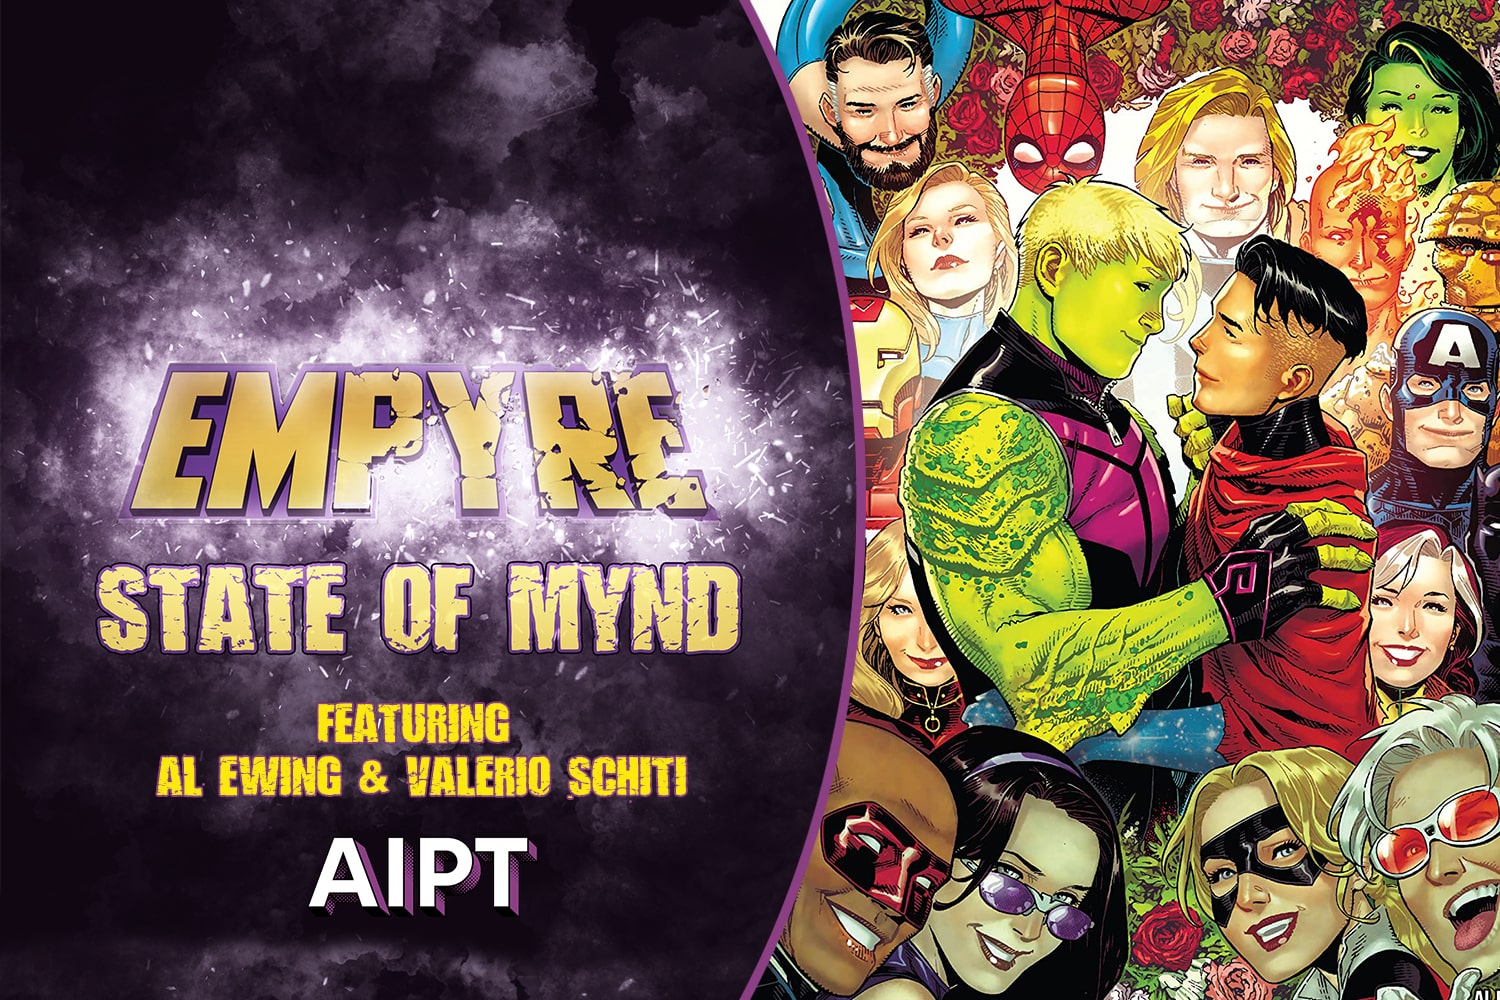 Empyre State of Mynd #7 (extra-sized): Al Ewing and Valerio Schiti answer your questions